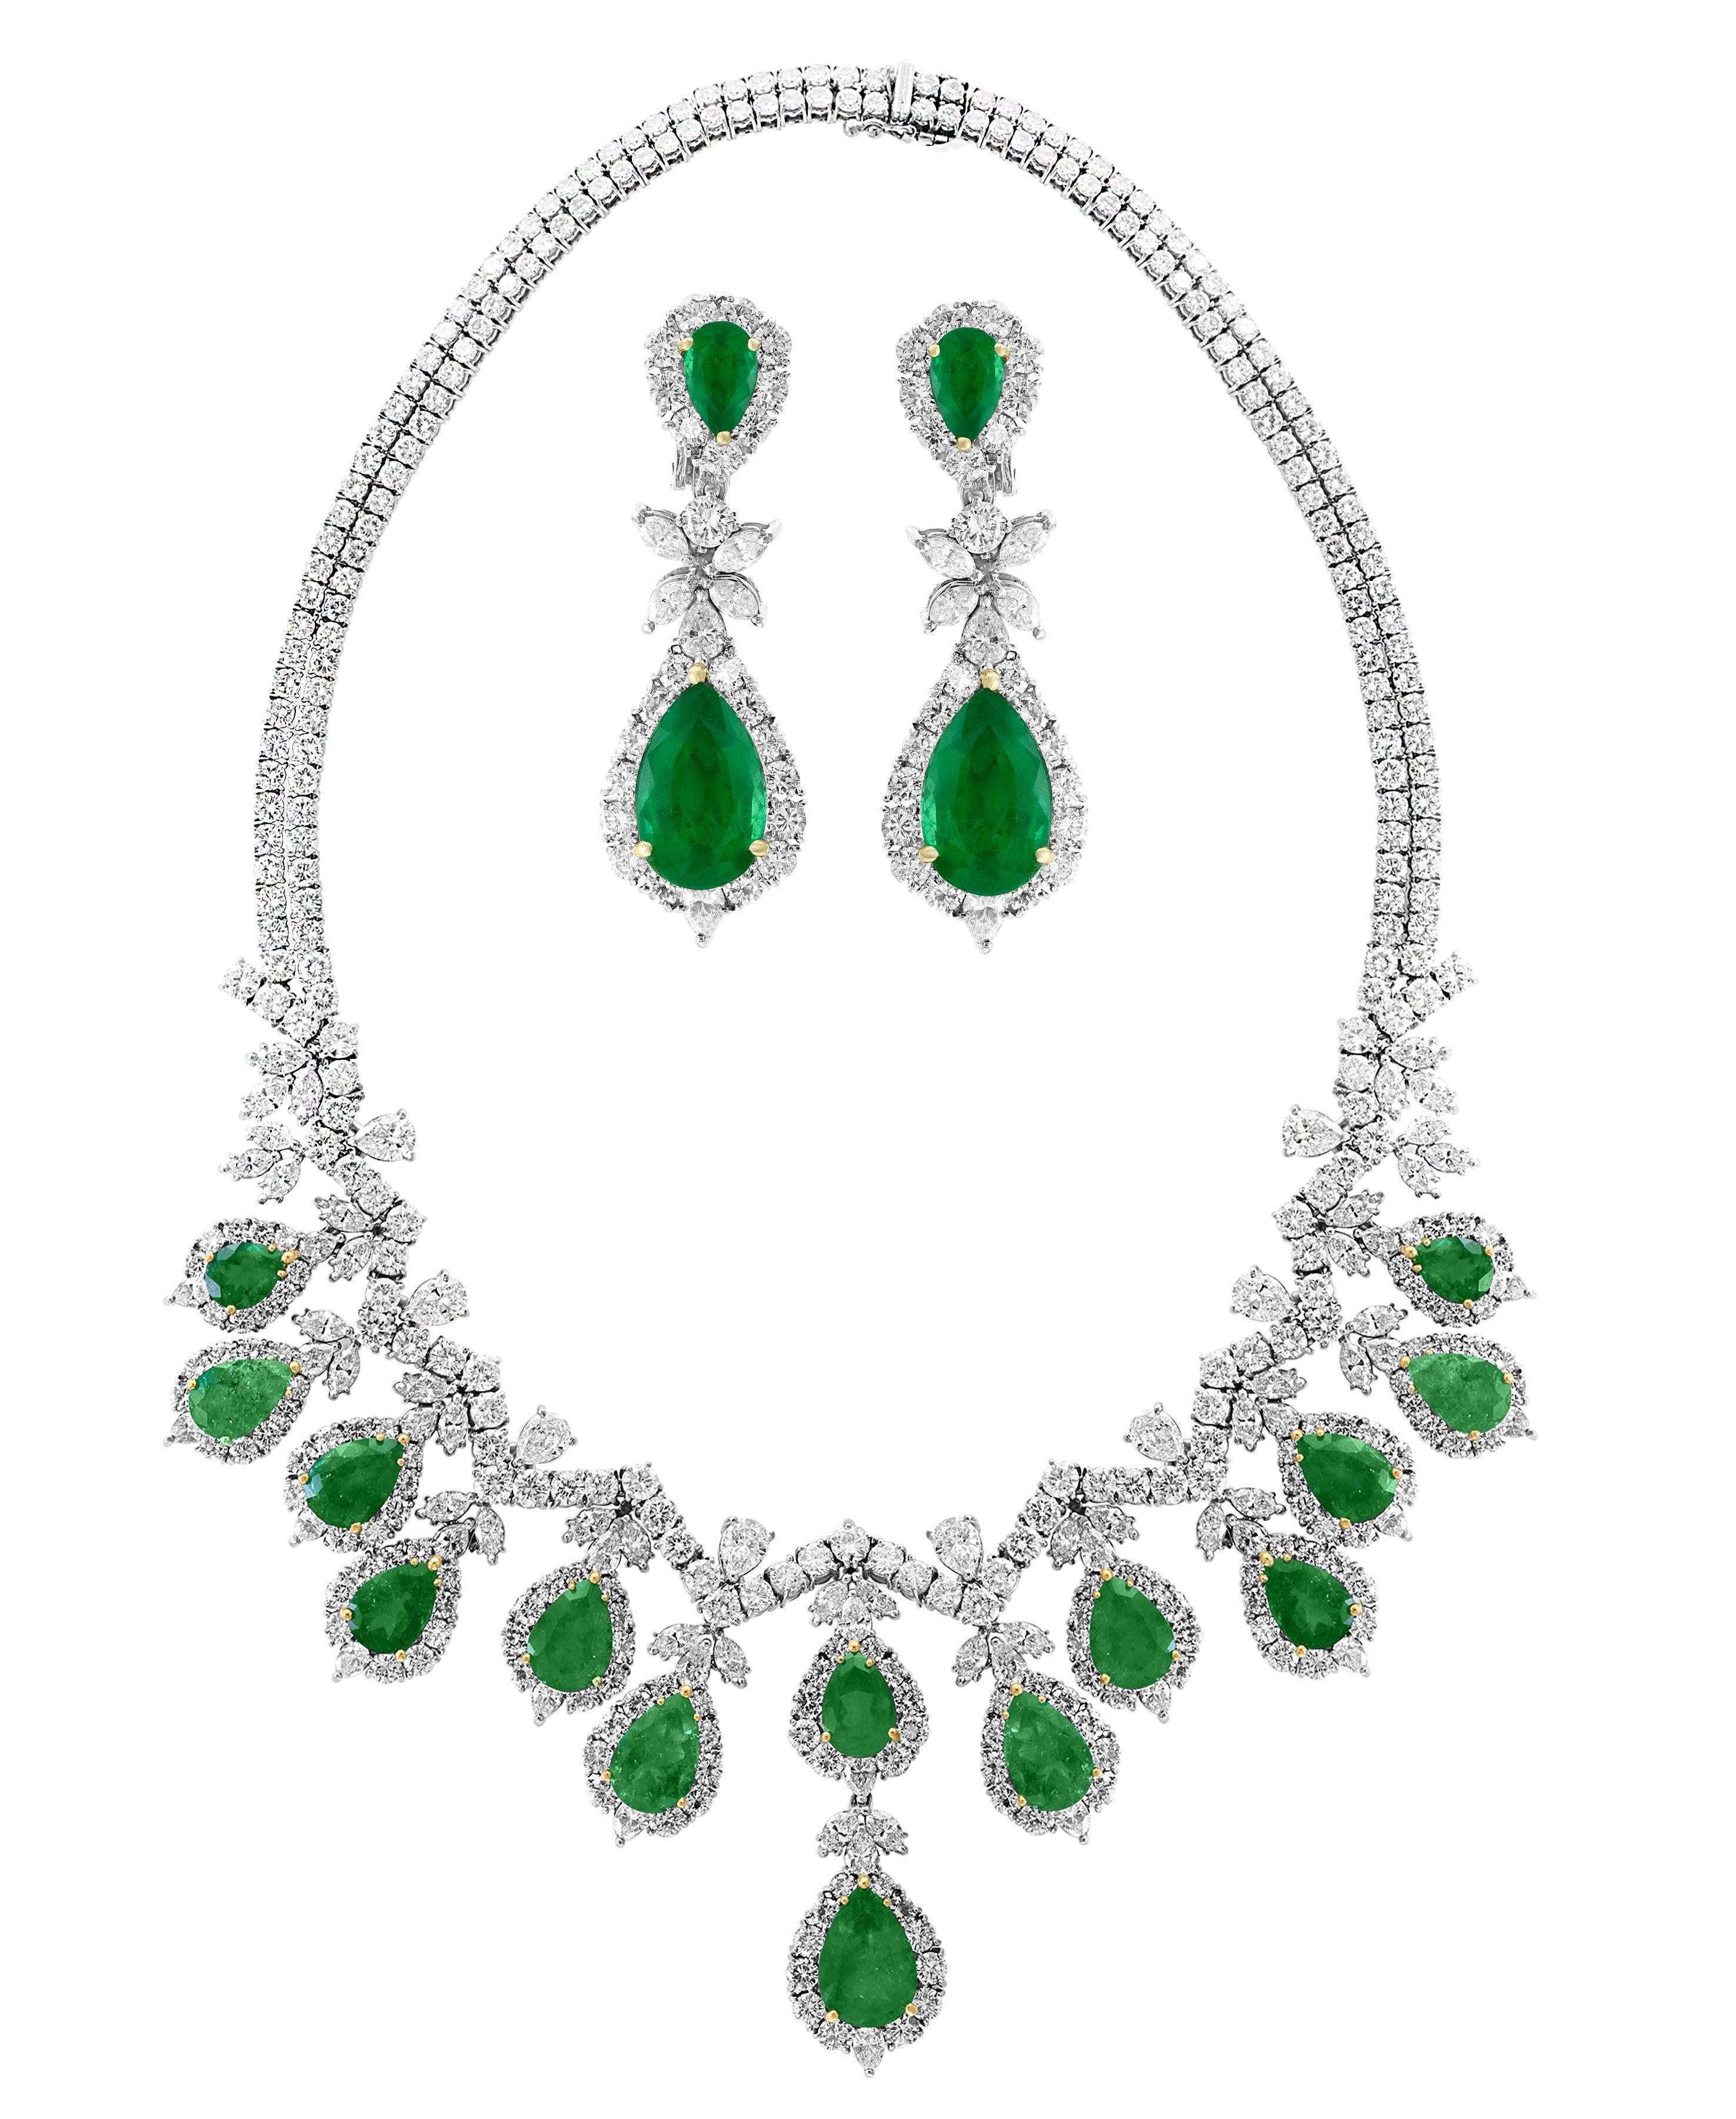 rewrite following 
AGL certified Pear Shape Colombian Emerald & Diamond Necklace & Earring Bridal Suite Platinum
Color: Deep Green, Transparent extreme Fine Color Quality
( Natural emeralds are commonly enhanced: but this one is only Minor clarity